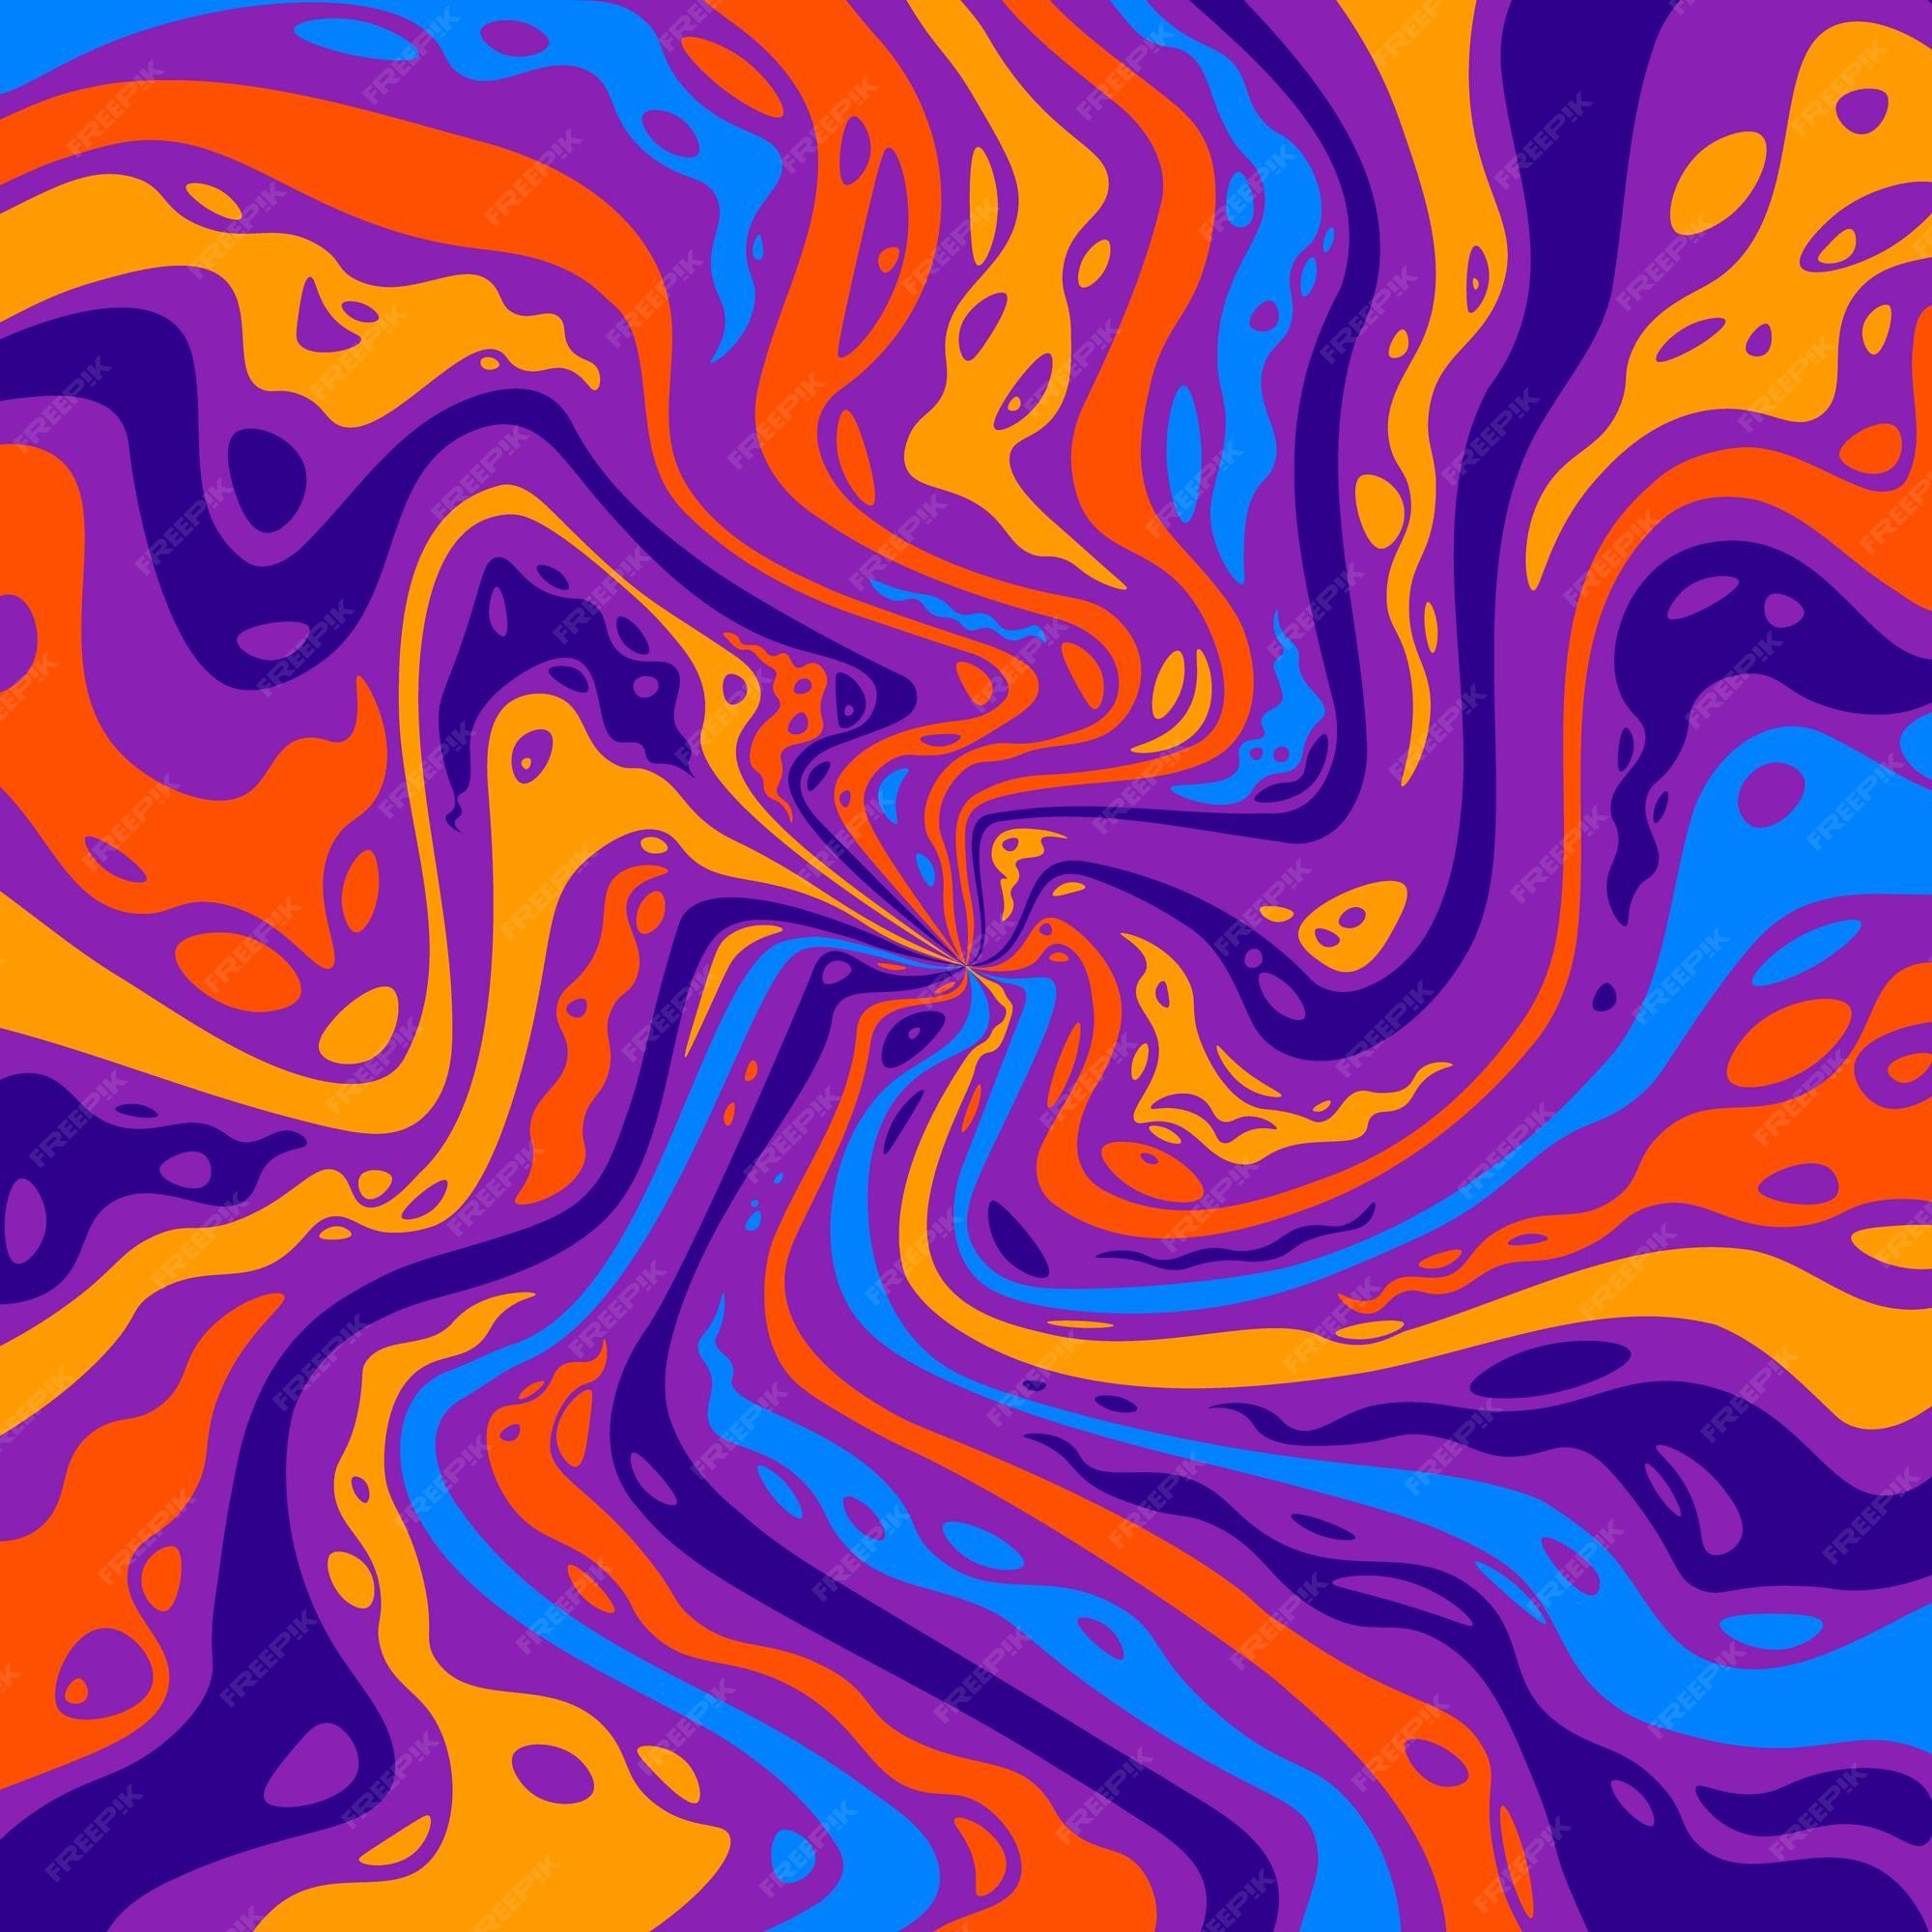 An abstract image of swirling lines in purple, orange and blue - Psychedelic